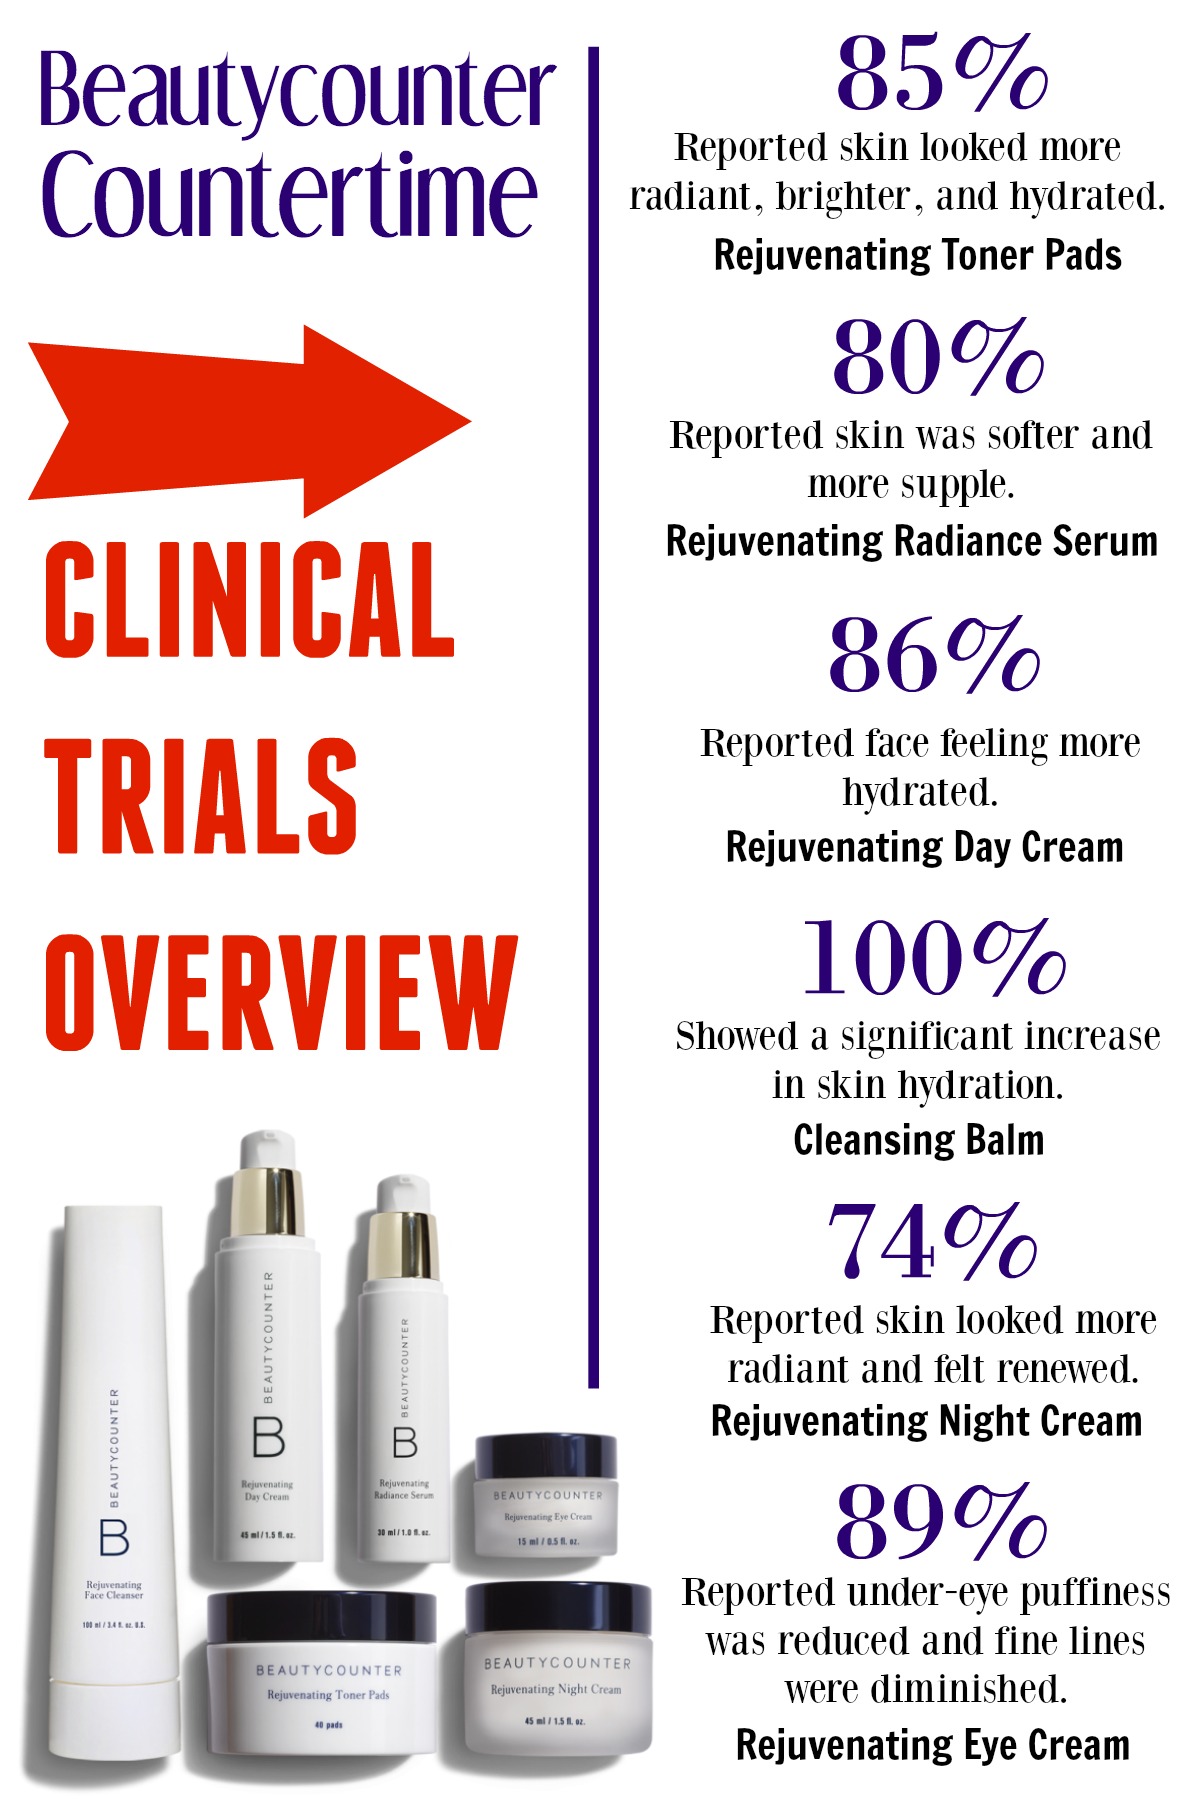 bc-beautycounter-countertime-clinical-trials-graphic